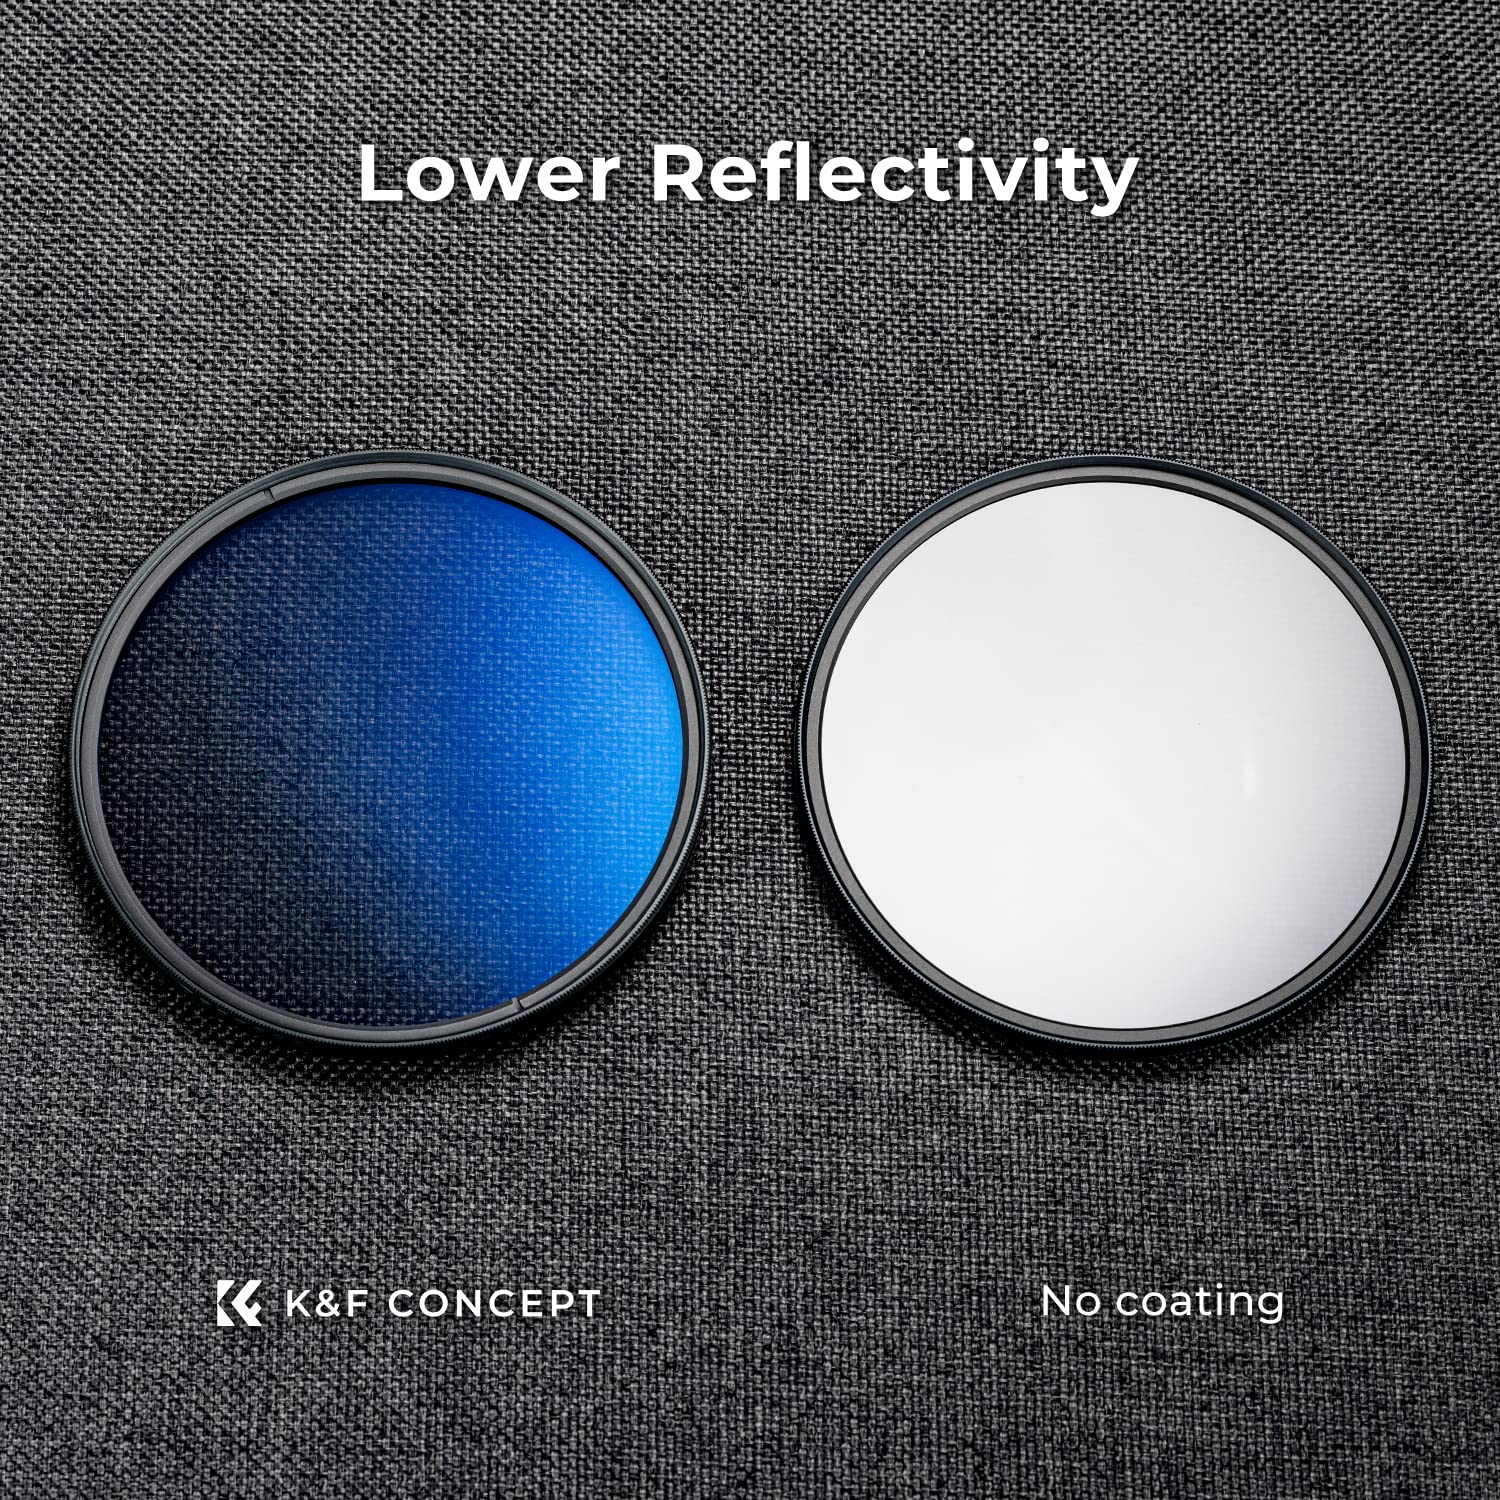 K&F Concept 58mm Circular Polarizer Filter Ultra-Slim 18 Multi-Coated Optical Glass Circular Polarizing Filter for Camera Lenses with Cleaning Cloth (K Series)